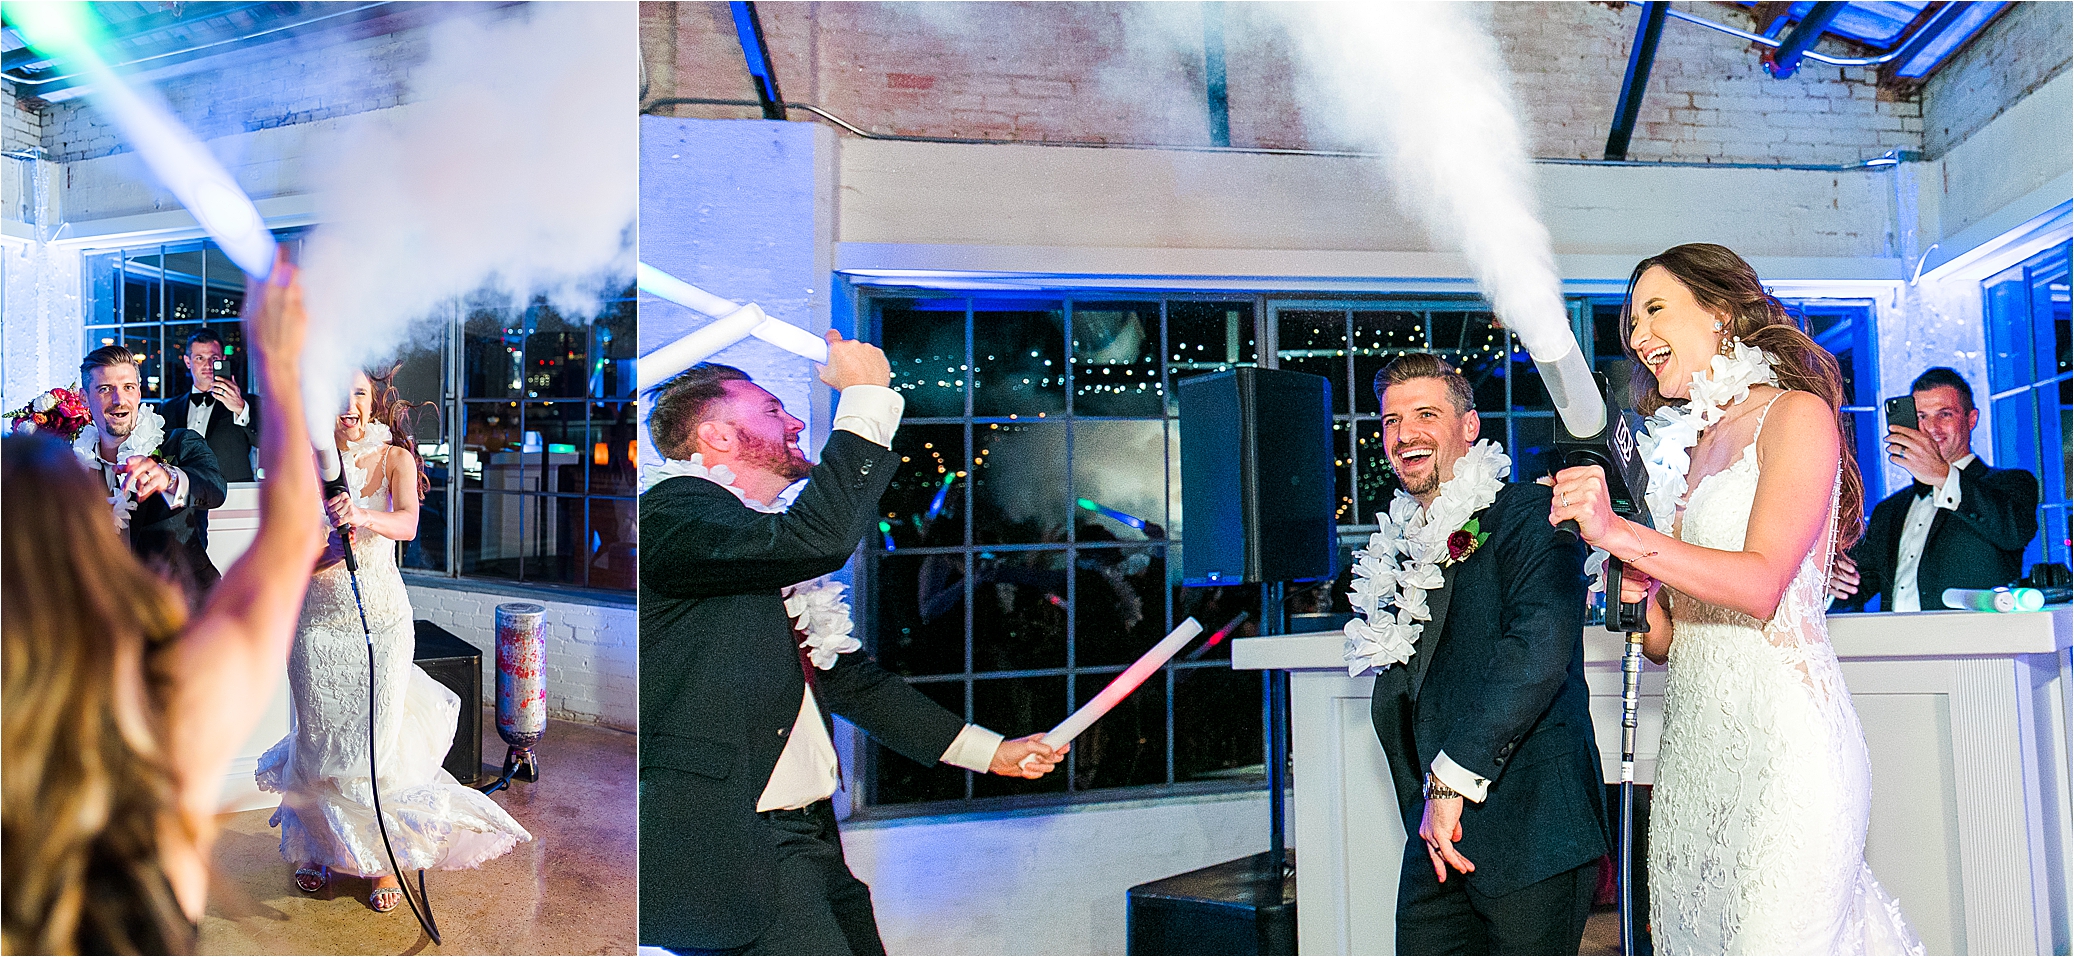 Cryo gun fun with wedding guests at their lively wedding reception at an industrial venue, Hickory Street Annex 